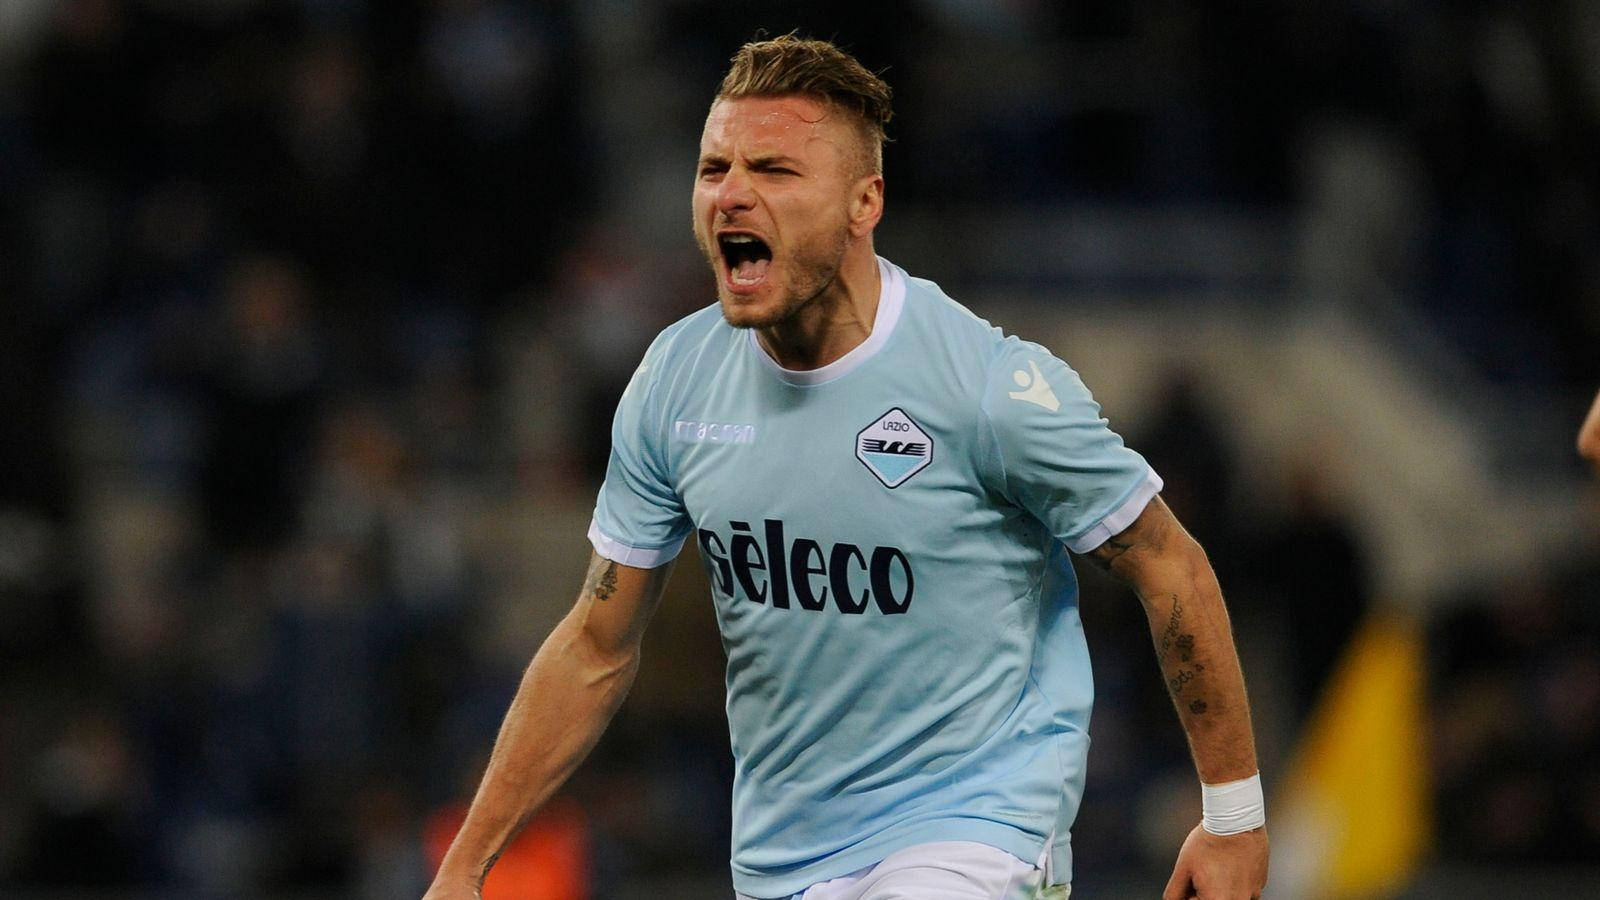 Ciro Immobile In Action On The Football Field Background